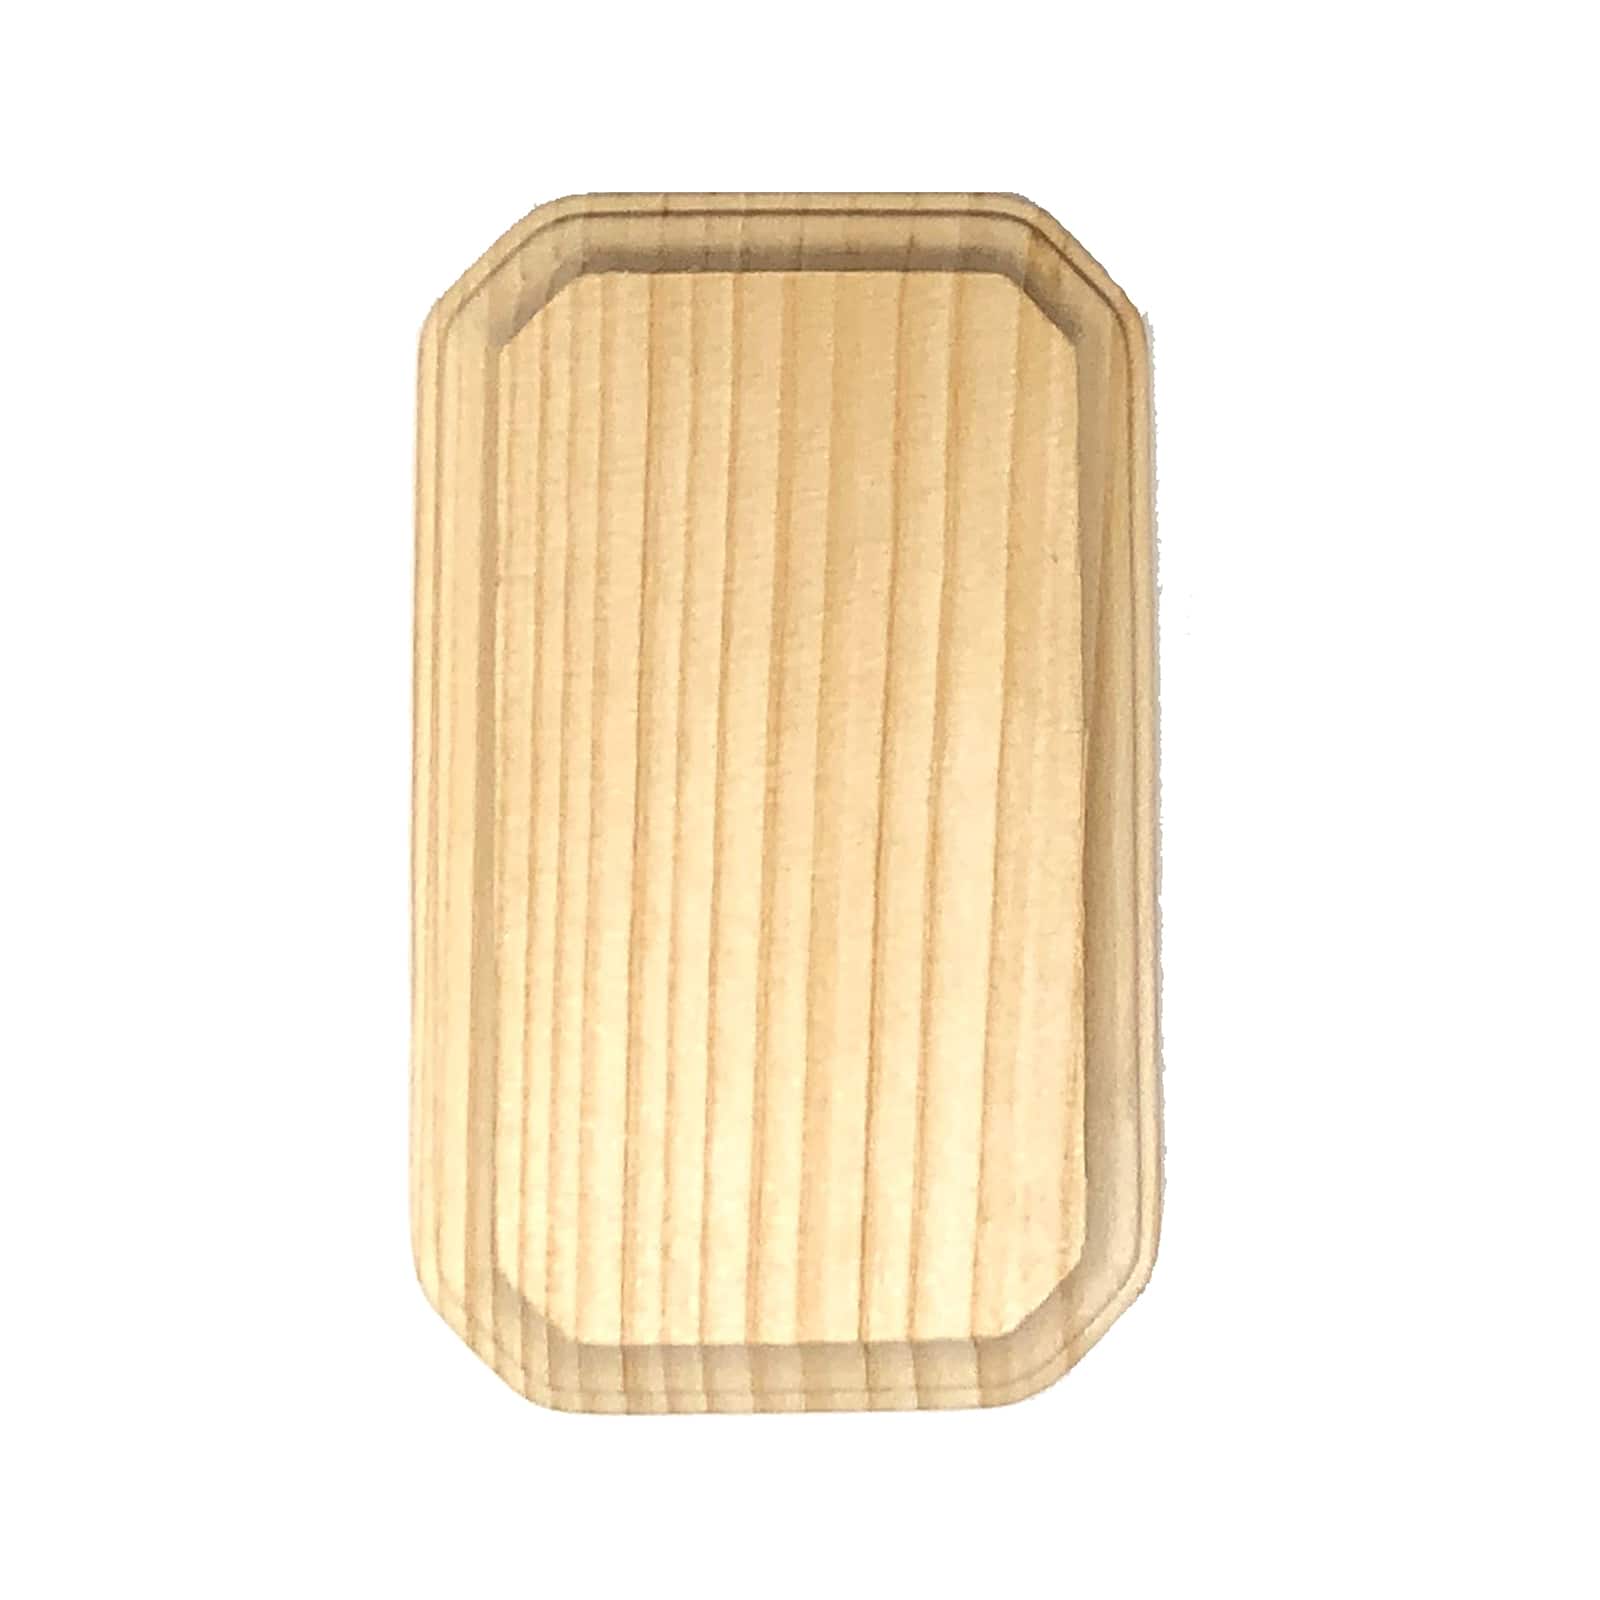 Assorted 3 x 5 Wood Plaque by Make Market®